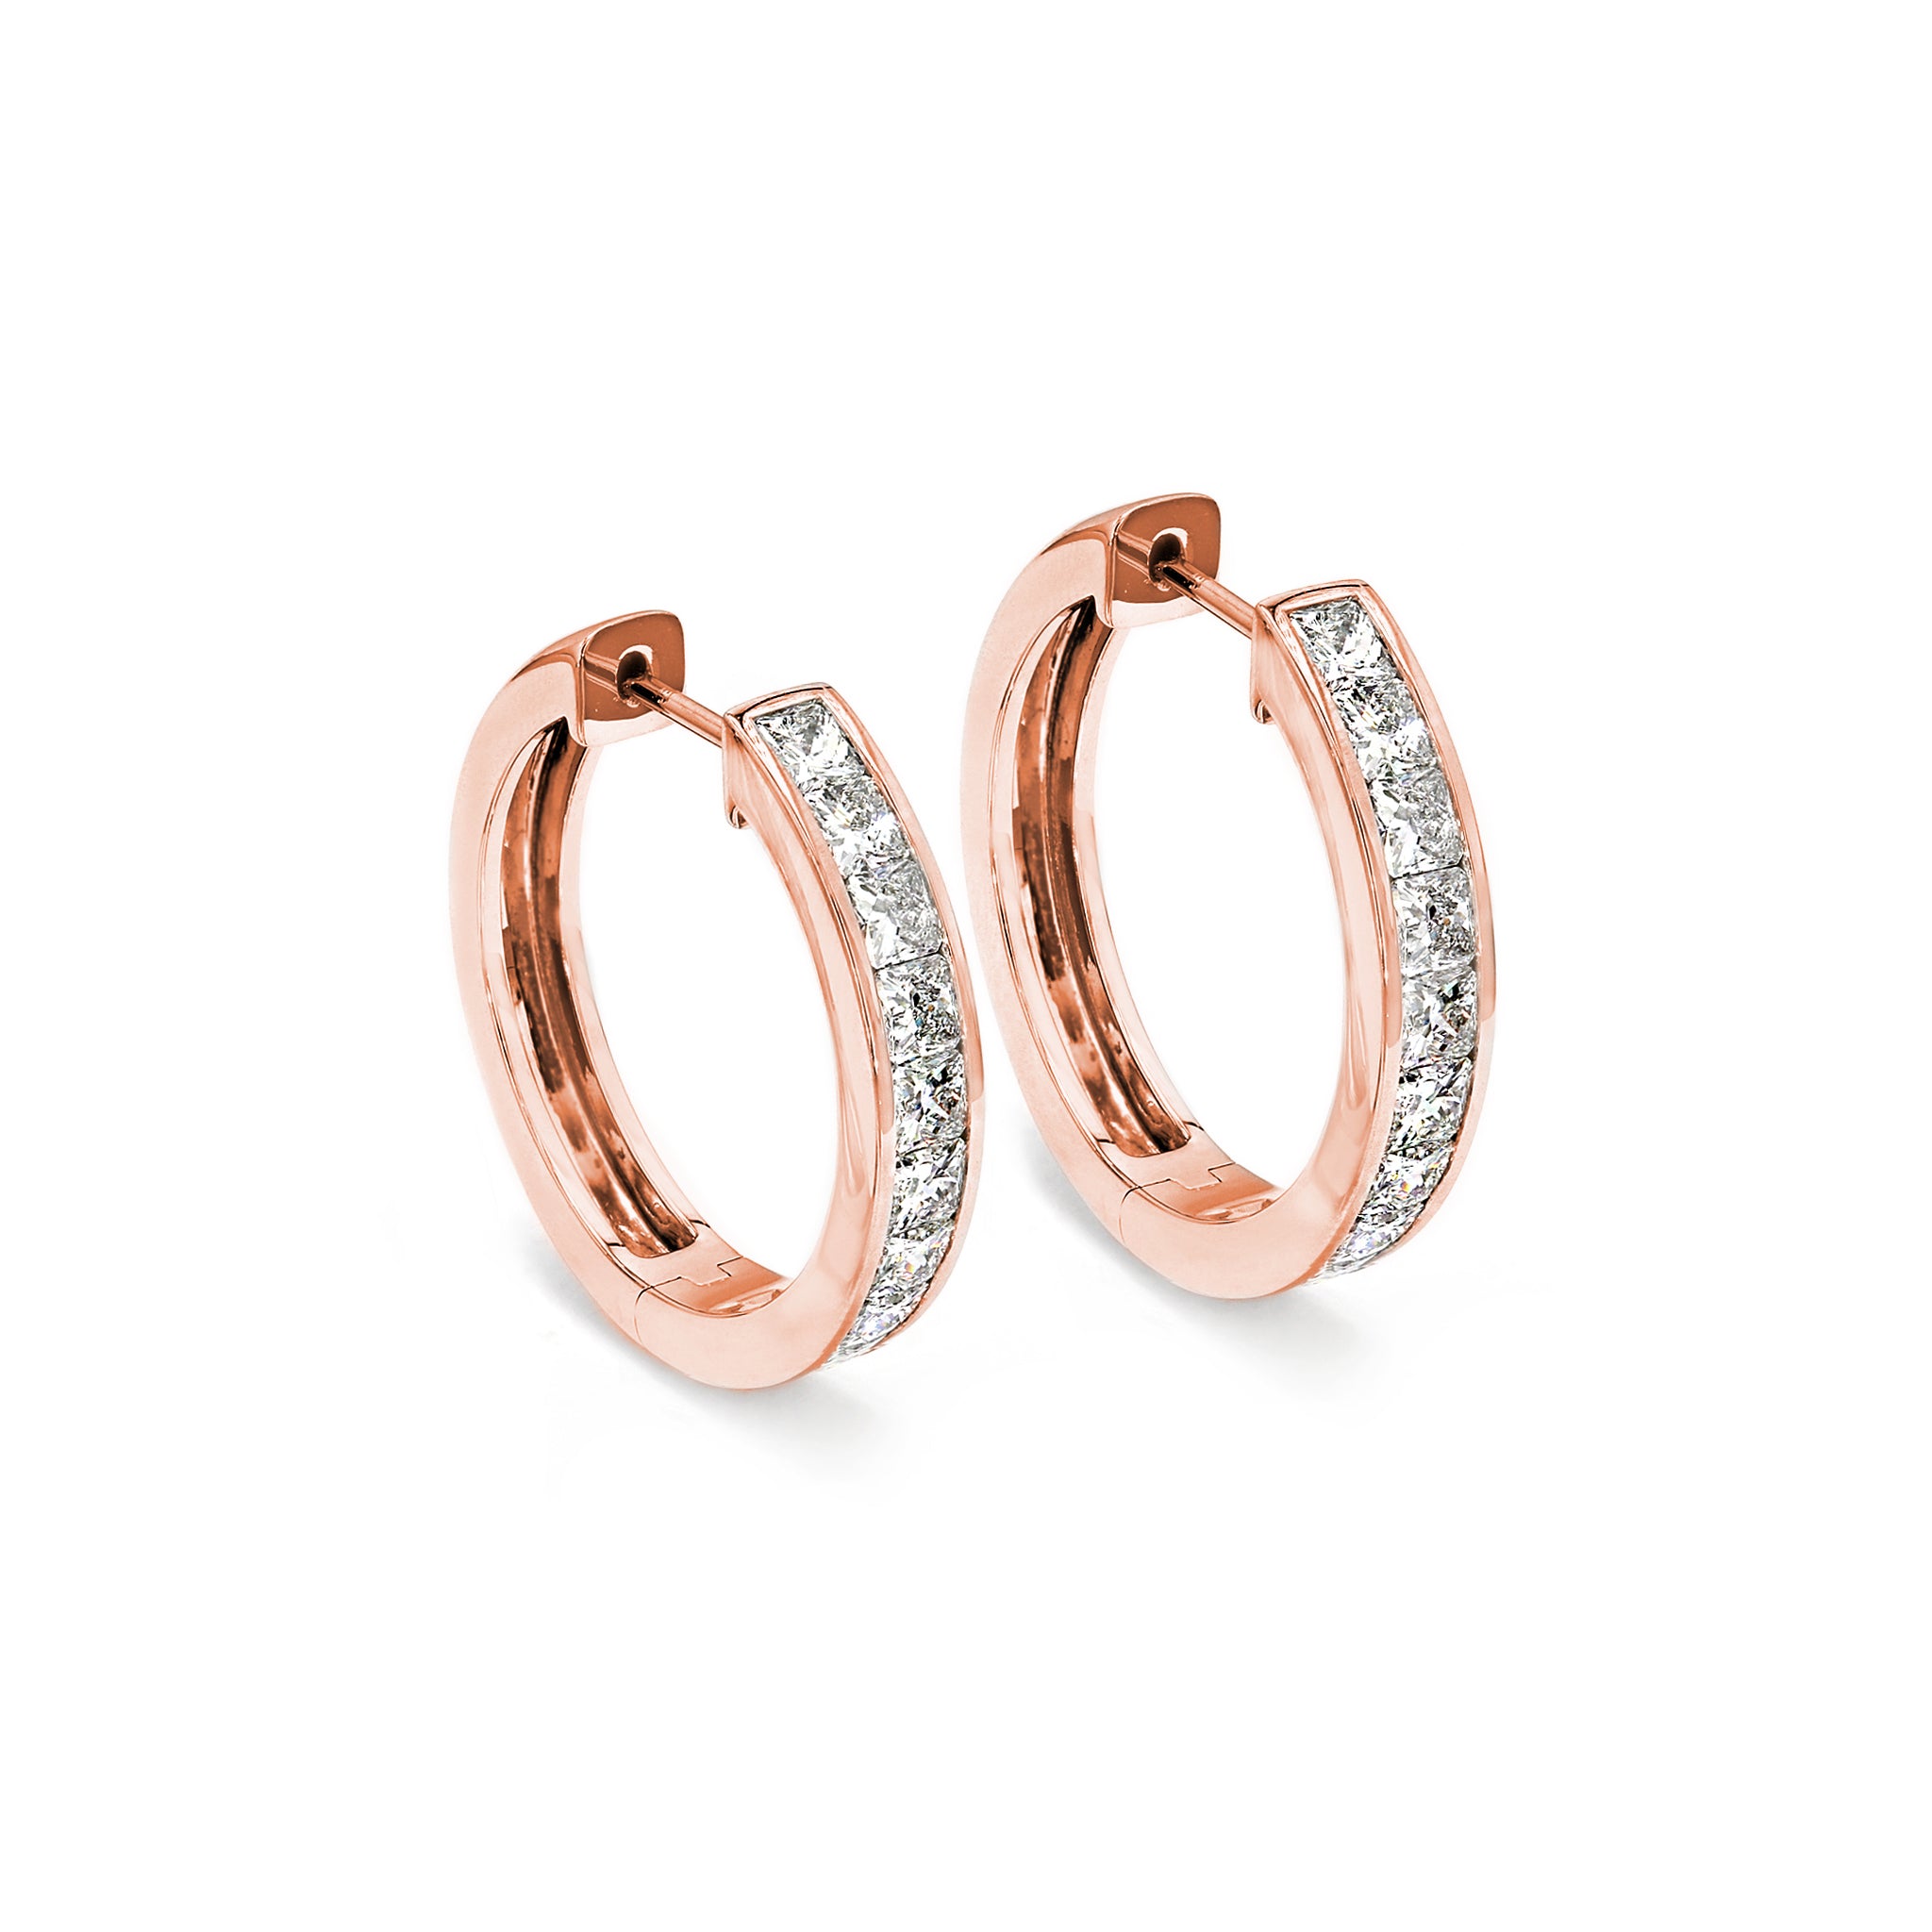 Shimansky - My Girl Channel Set Diamond Huggie Earrings 2.50ct Crafted in 18K Rose Gold